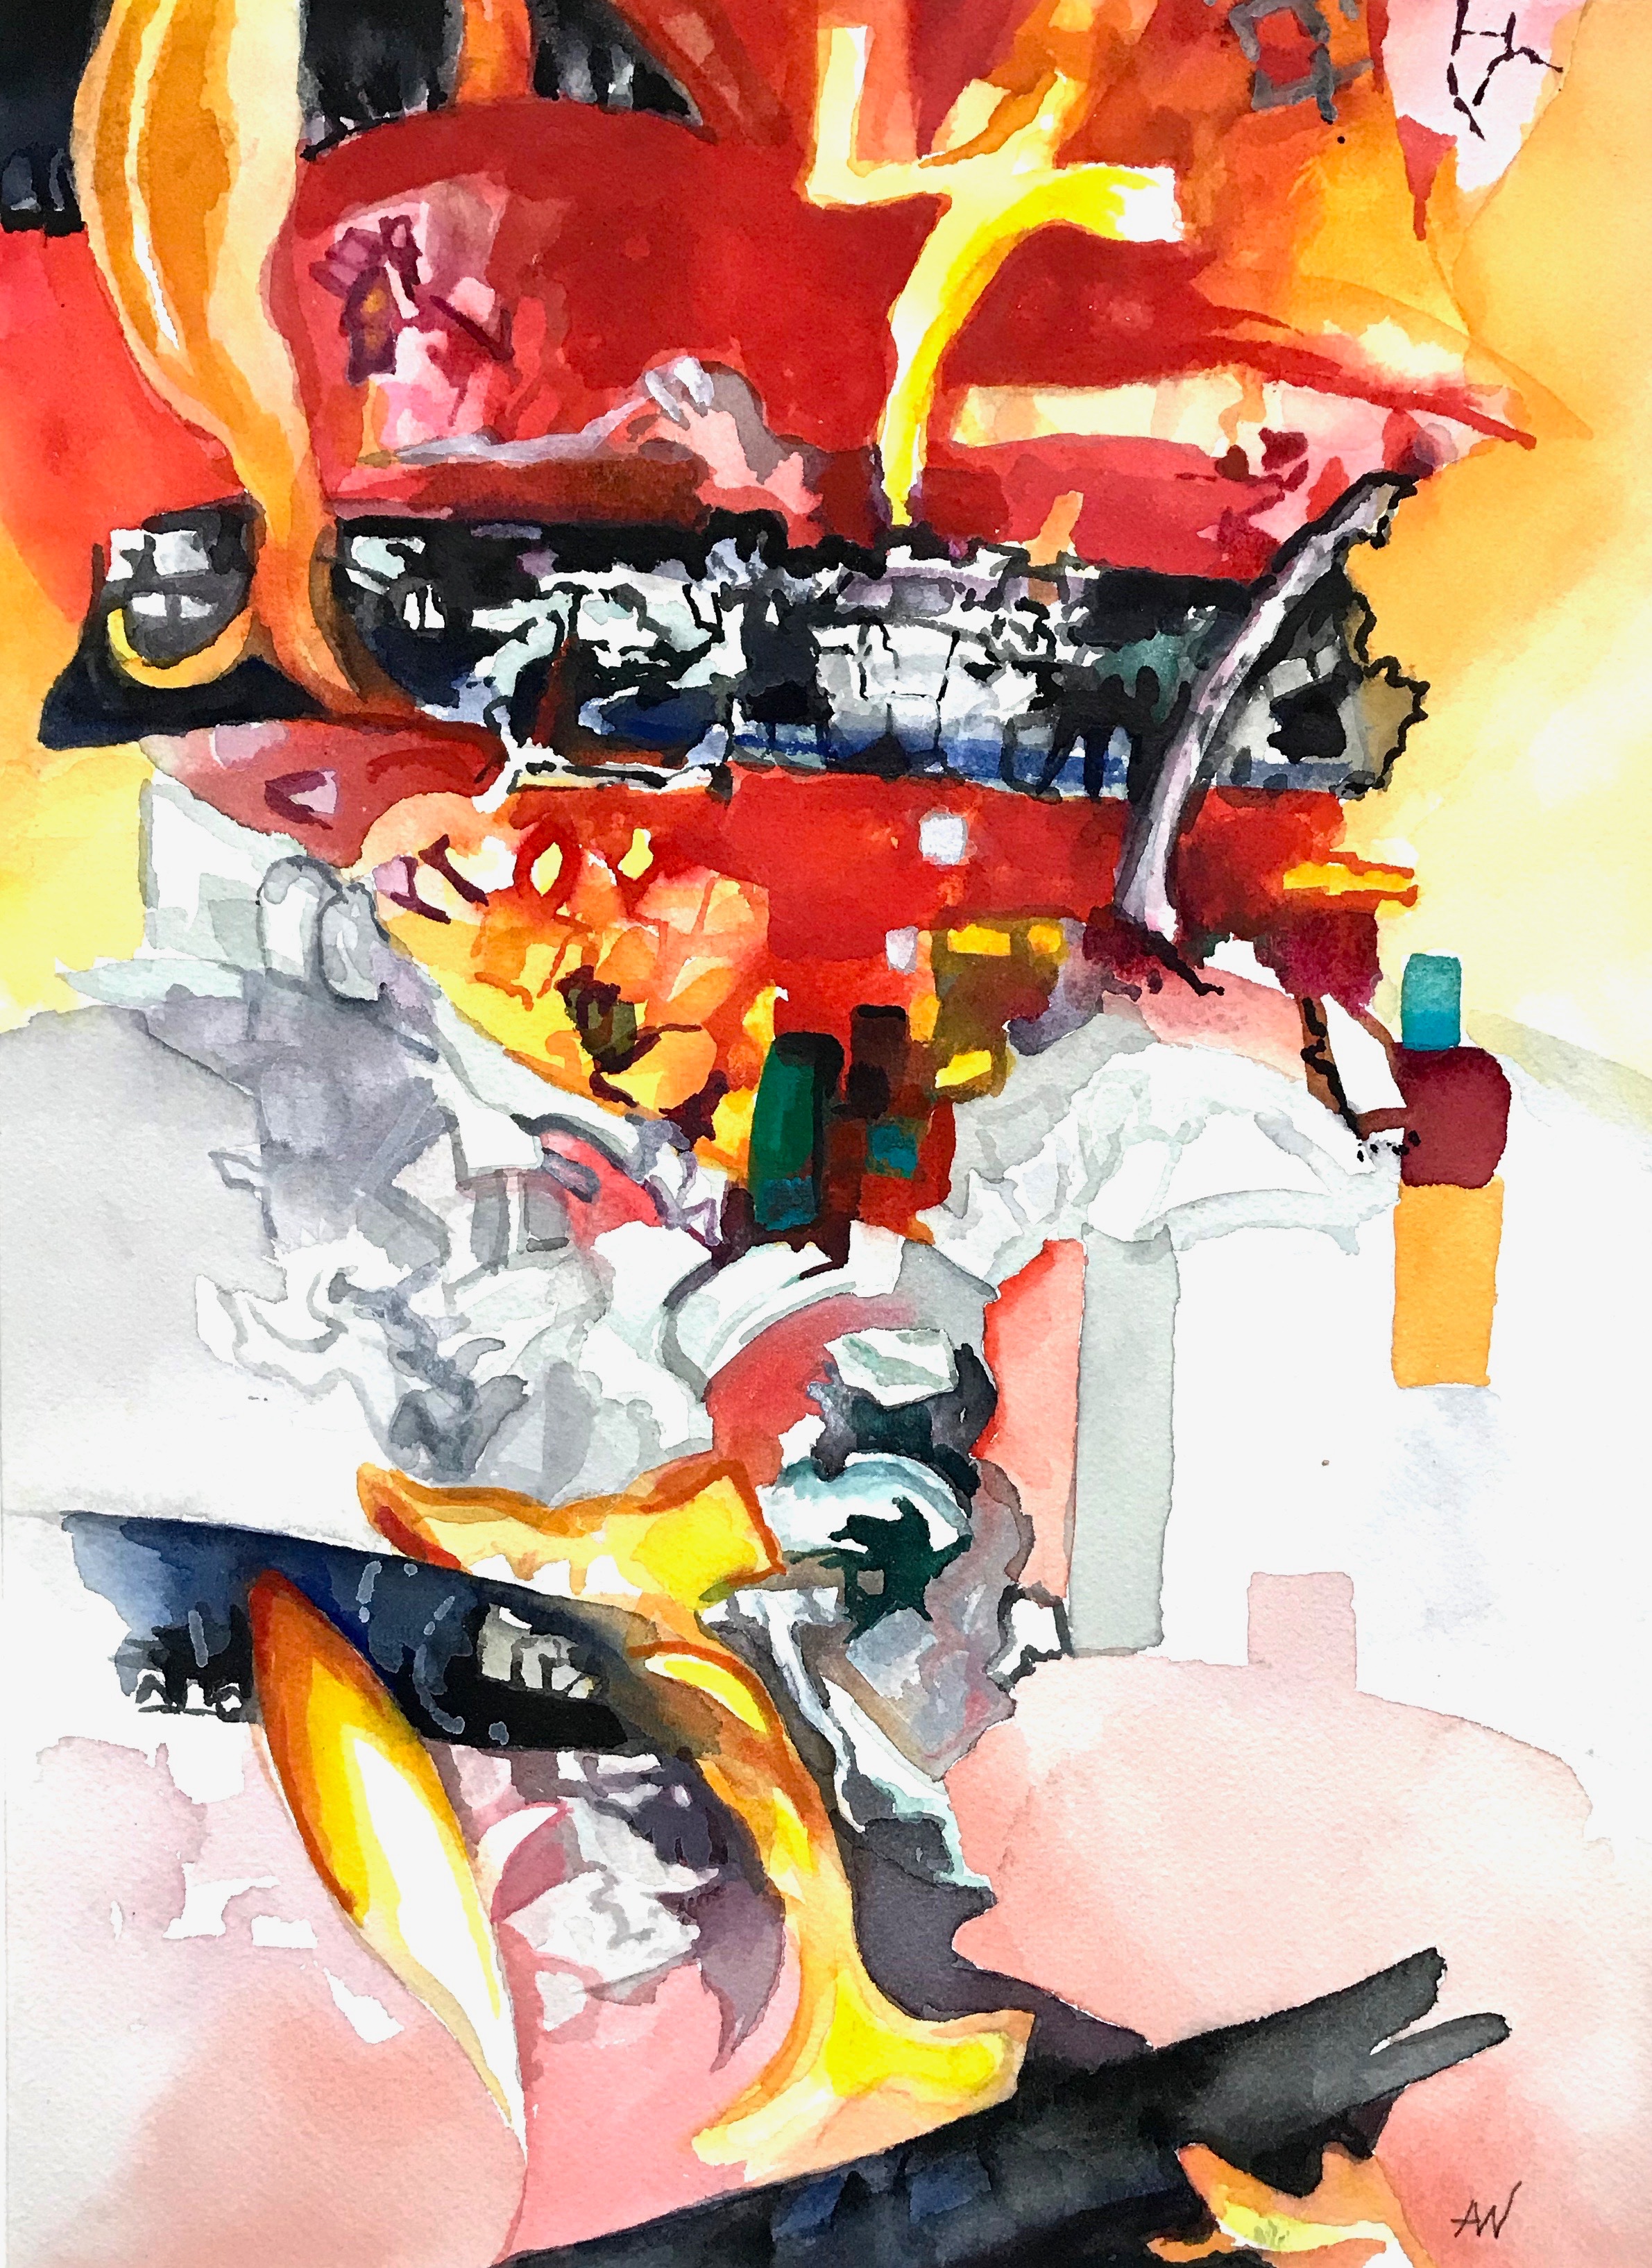 Raging Fire, 14 x 10 inches, 2017